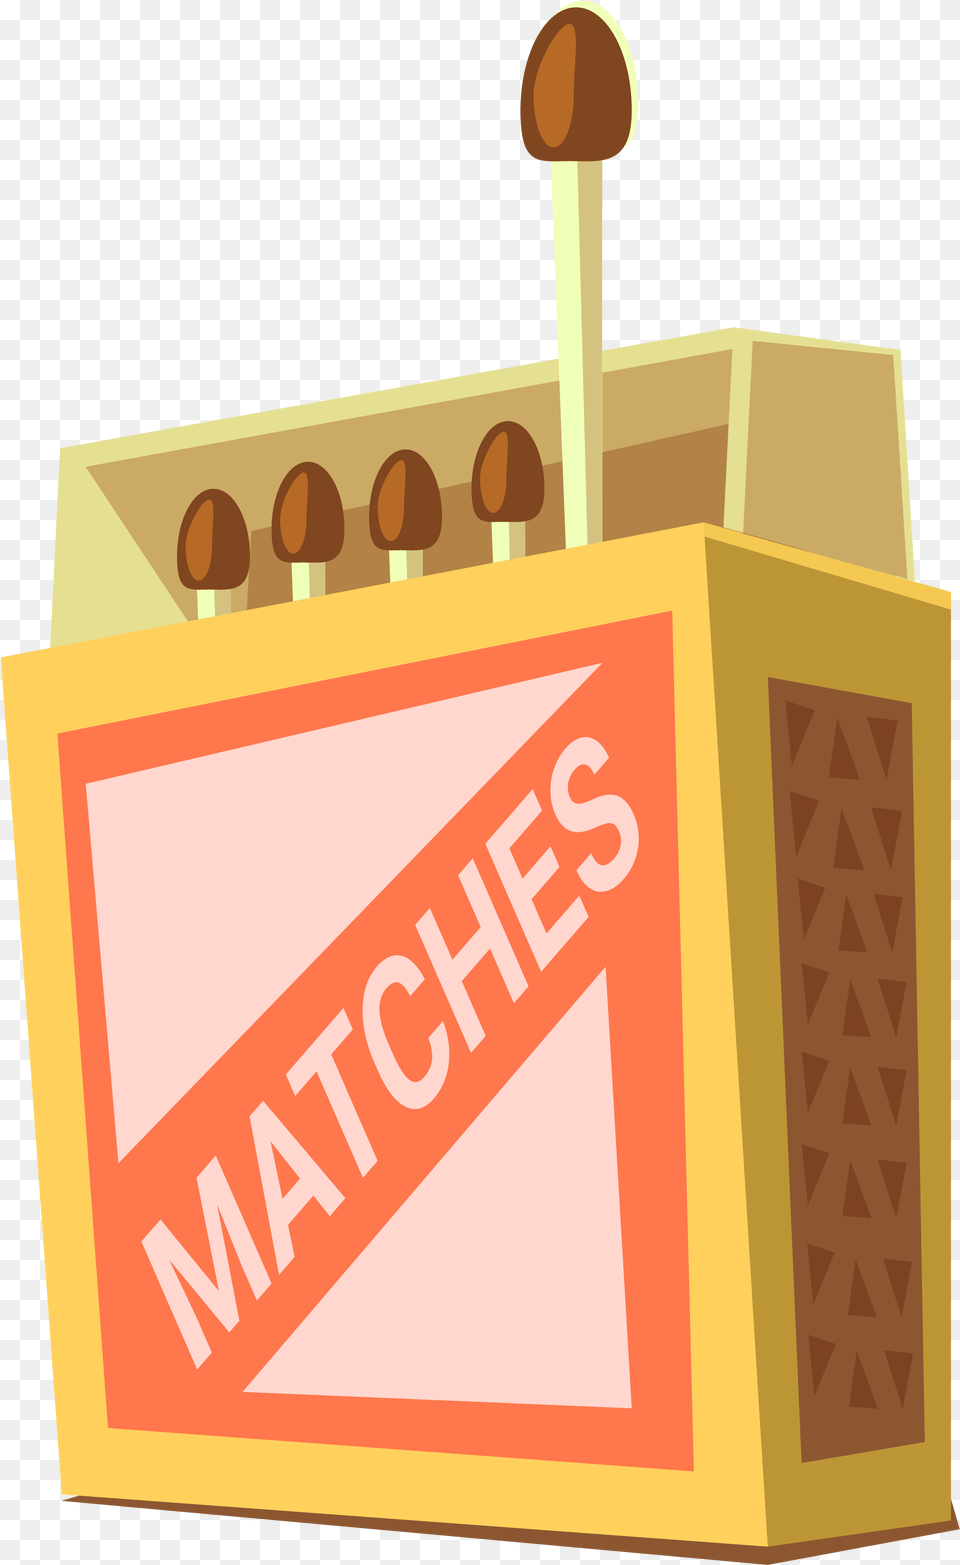 Matches Picture Cartoon Matches, Box Free Transparent Png